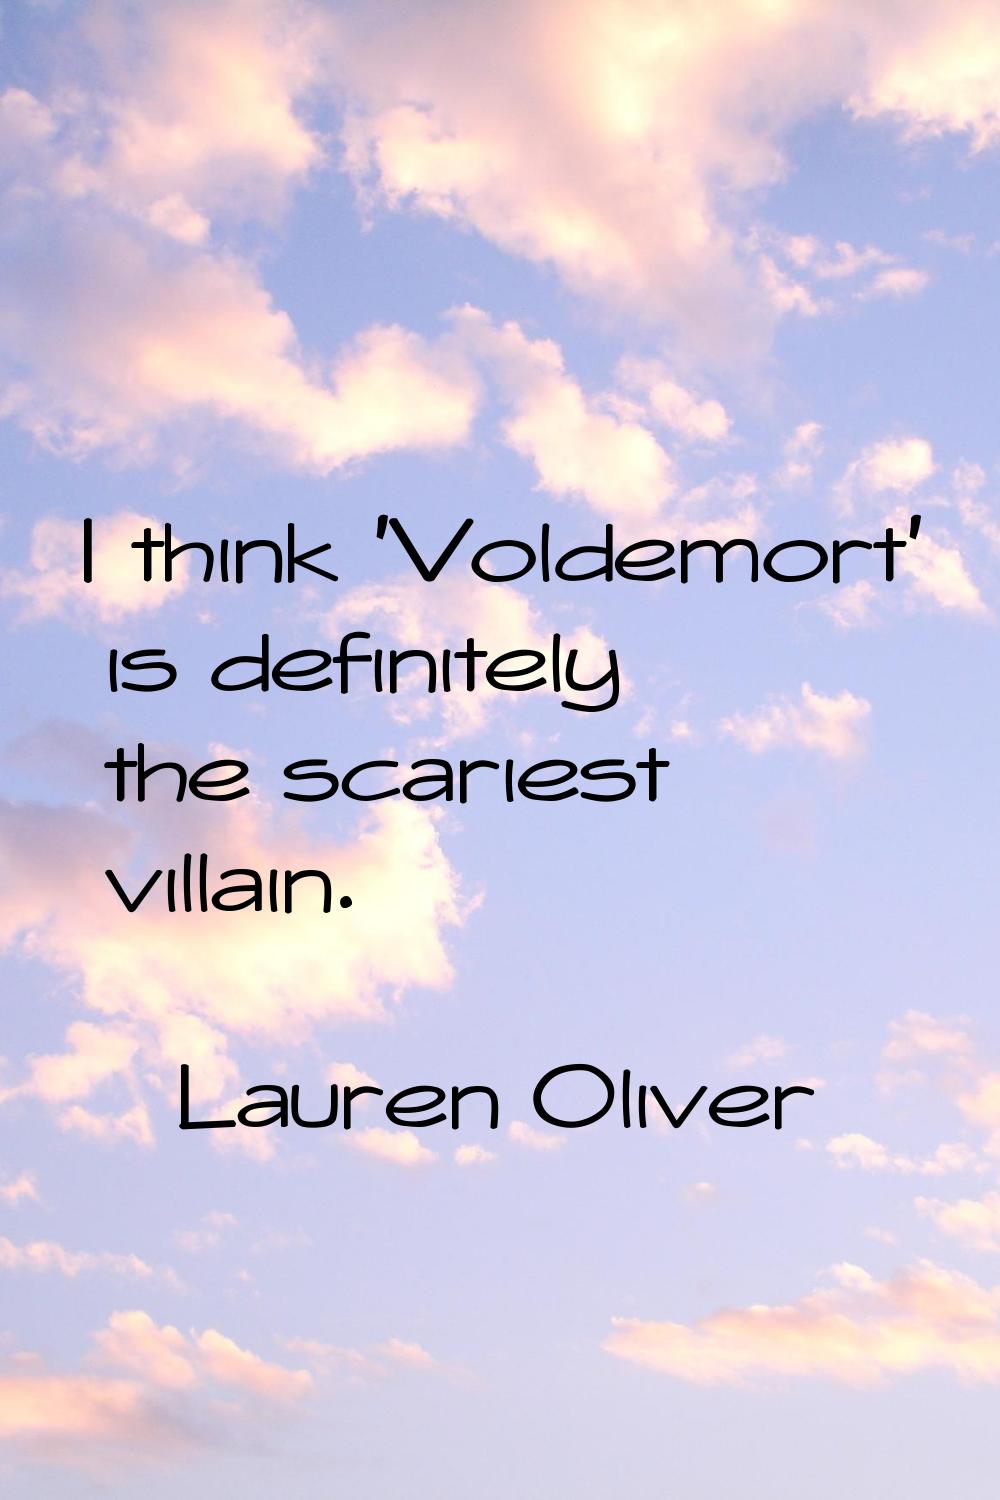 I think 'Voldemort' is definitely the scariest villain.